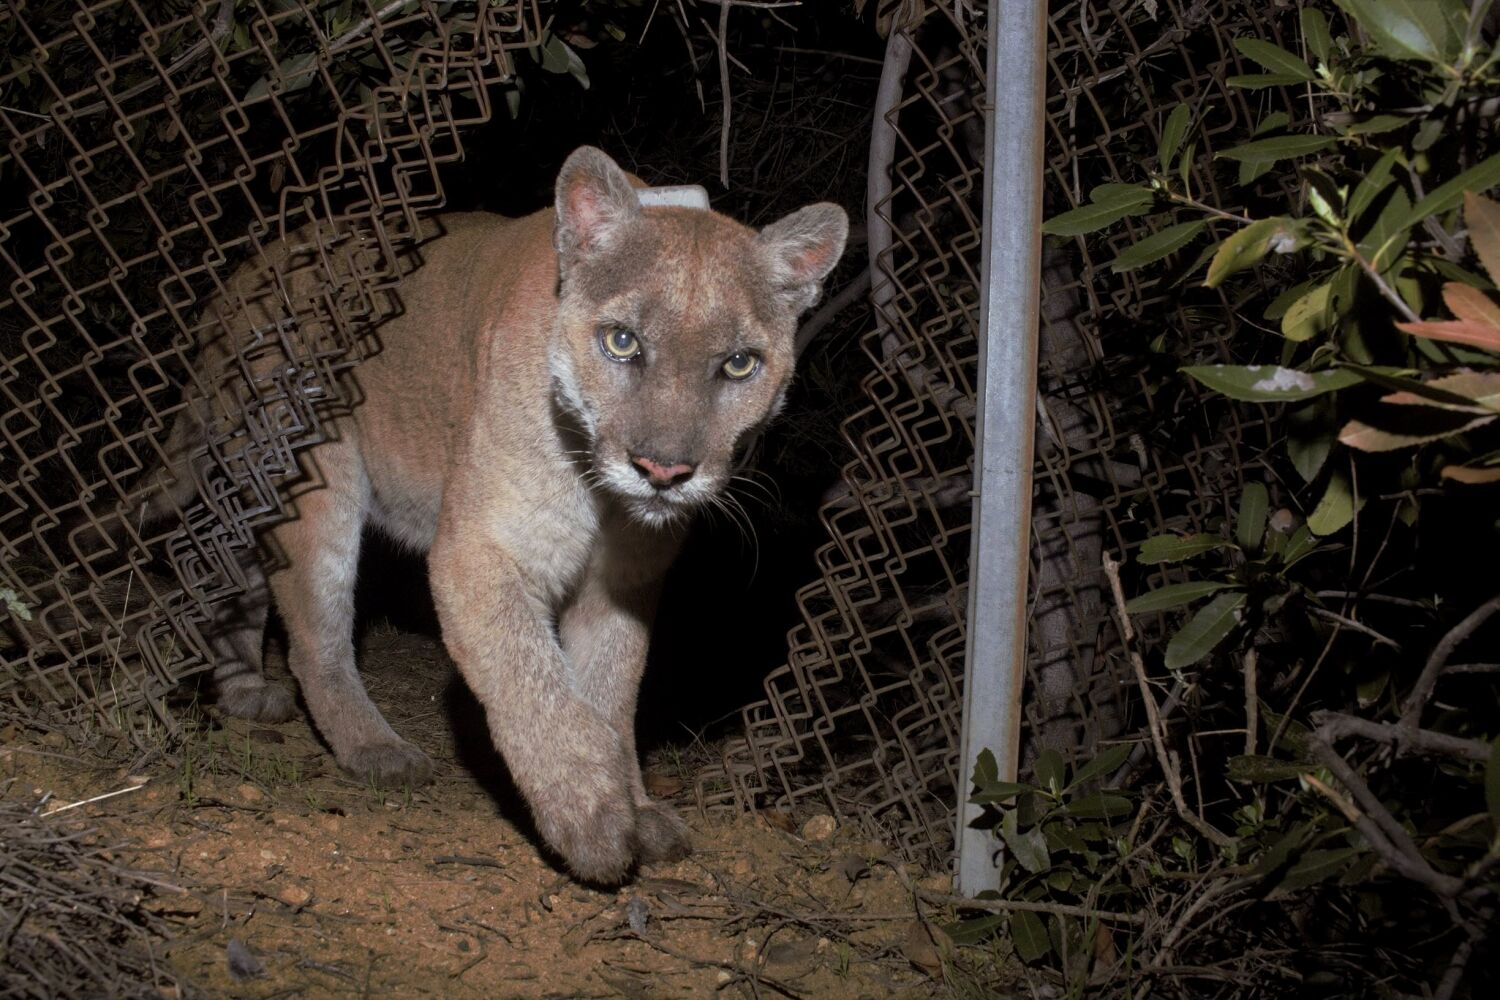 Los Angeles is mourning P-22. Share your memories, thoughts and stories of the mountain lion